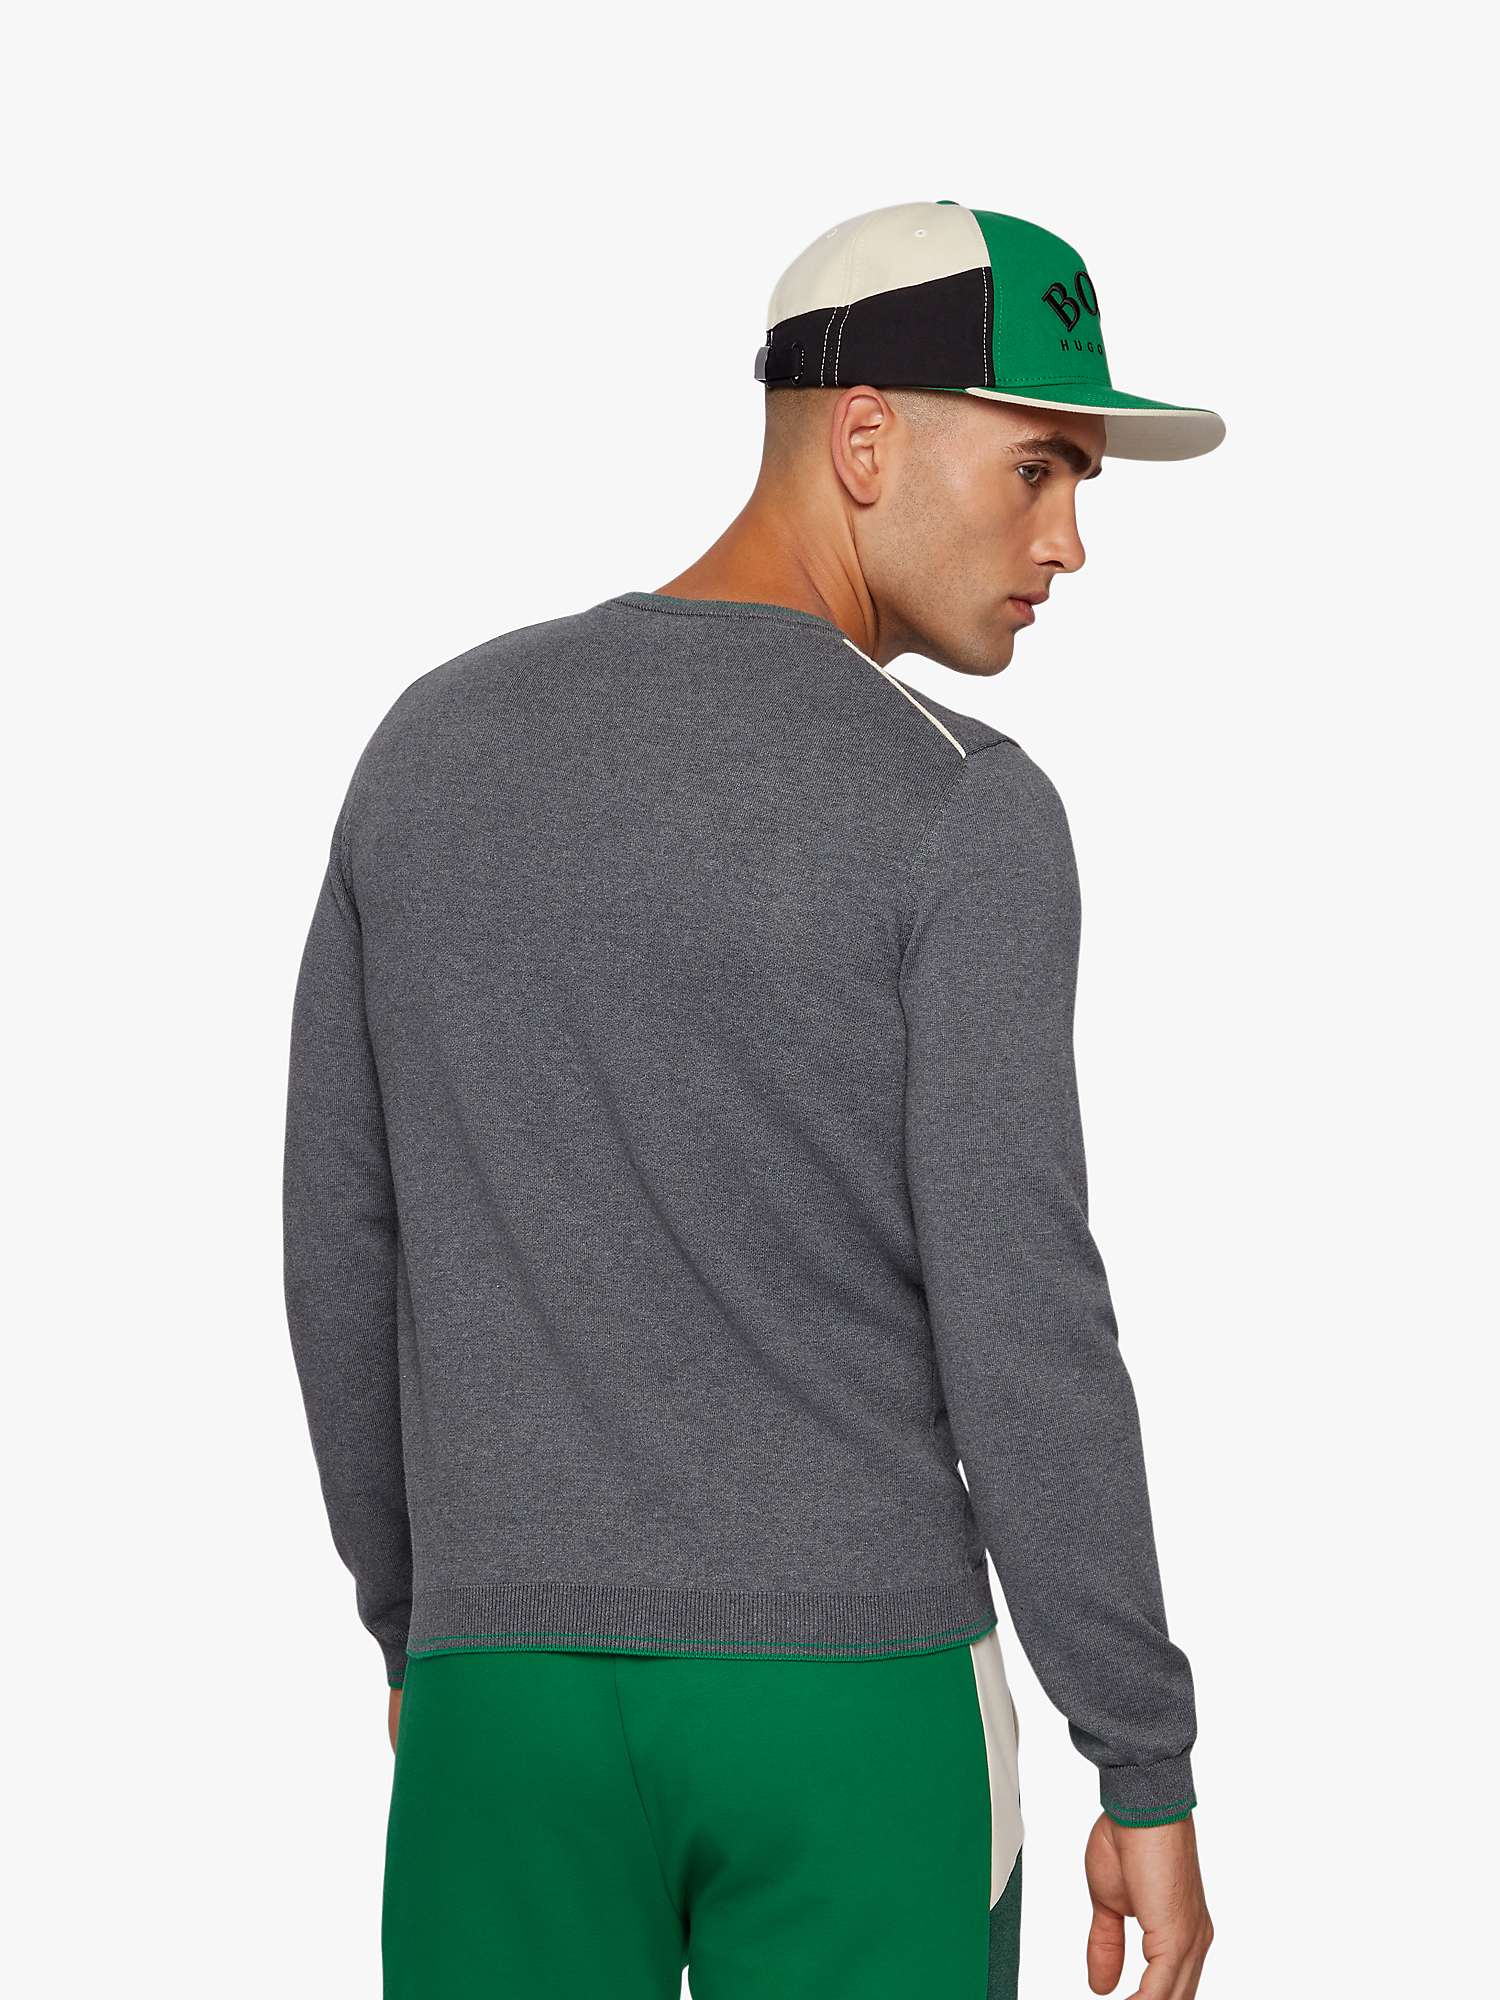 Buy BOSS Riston Contrast Piping Jumper Online at johnlewis.com